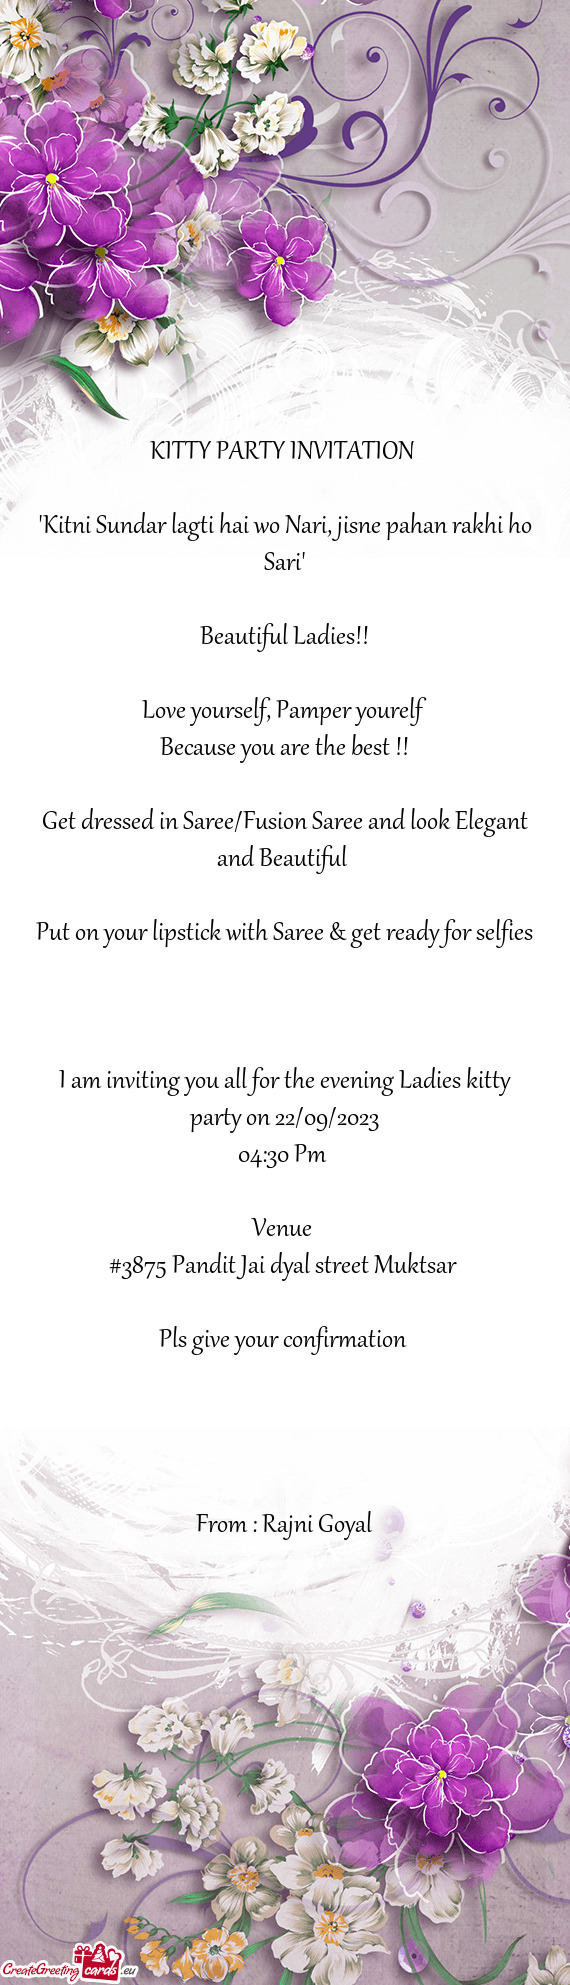 I am inviting you all for the evening Ladies kitty party on 22/09/2023